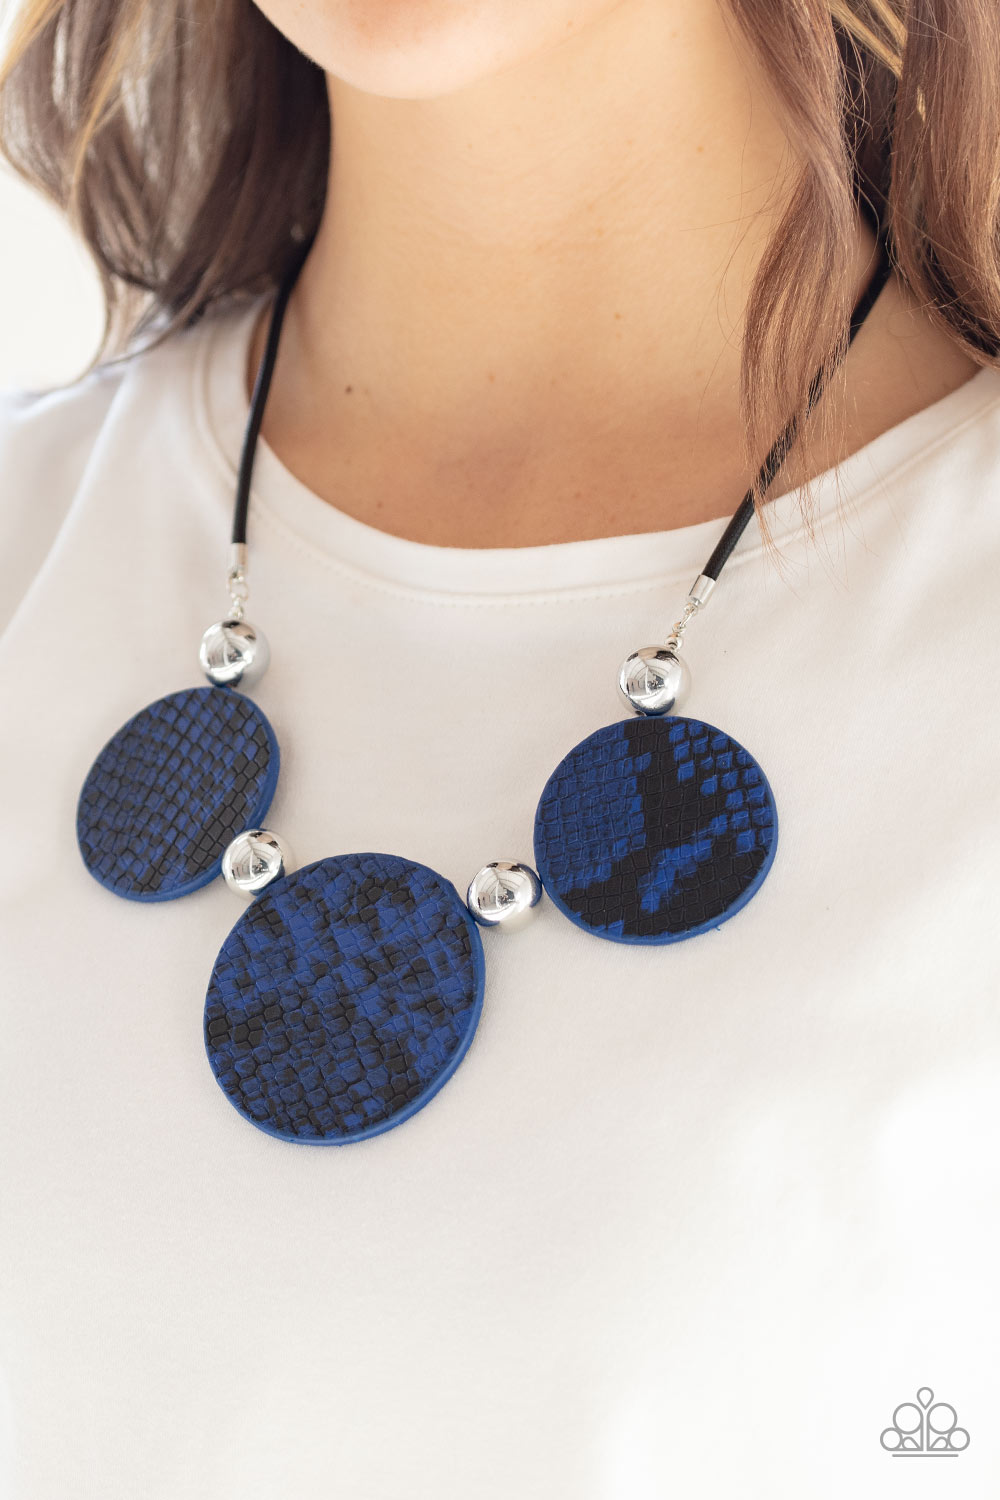 Viper Pit Blue Necklace - Paparazzi Accessories  A wild collection of oversized silver beads and blue and black python patterned leather pieces are strung along an invisible wire below the collar for a statement-making finish. Features an adjustable clasp closure.  Sold as one individual necklace. Includes one pair of matching earrings.